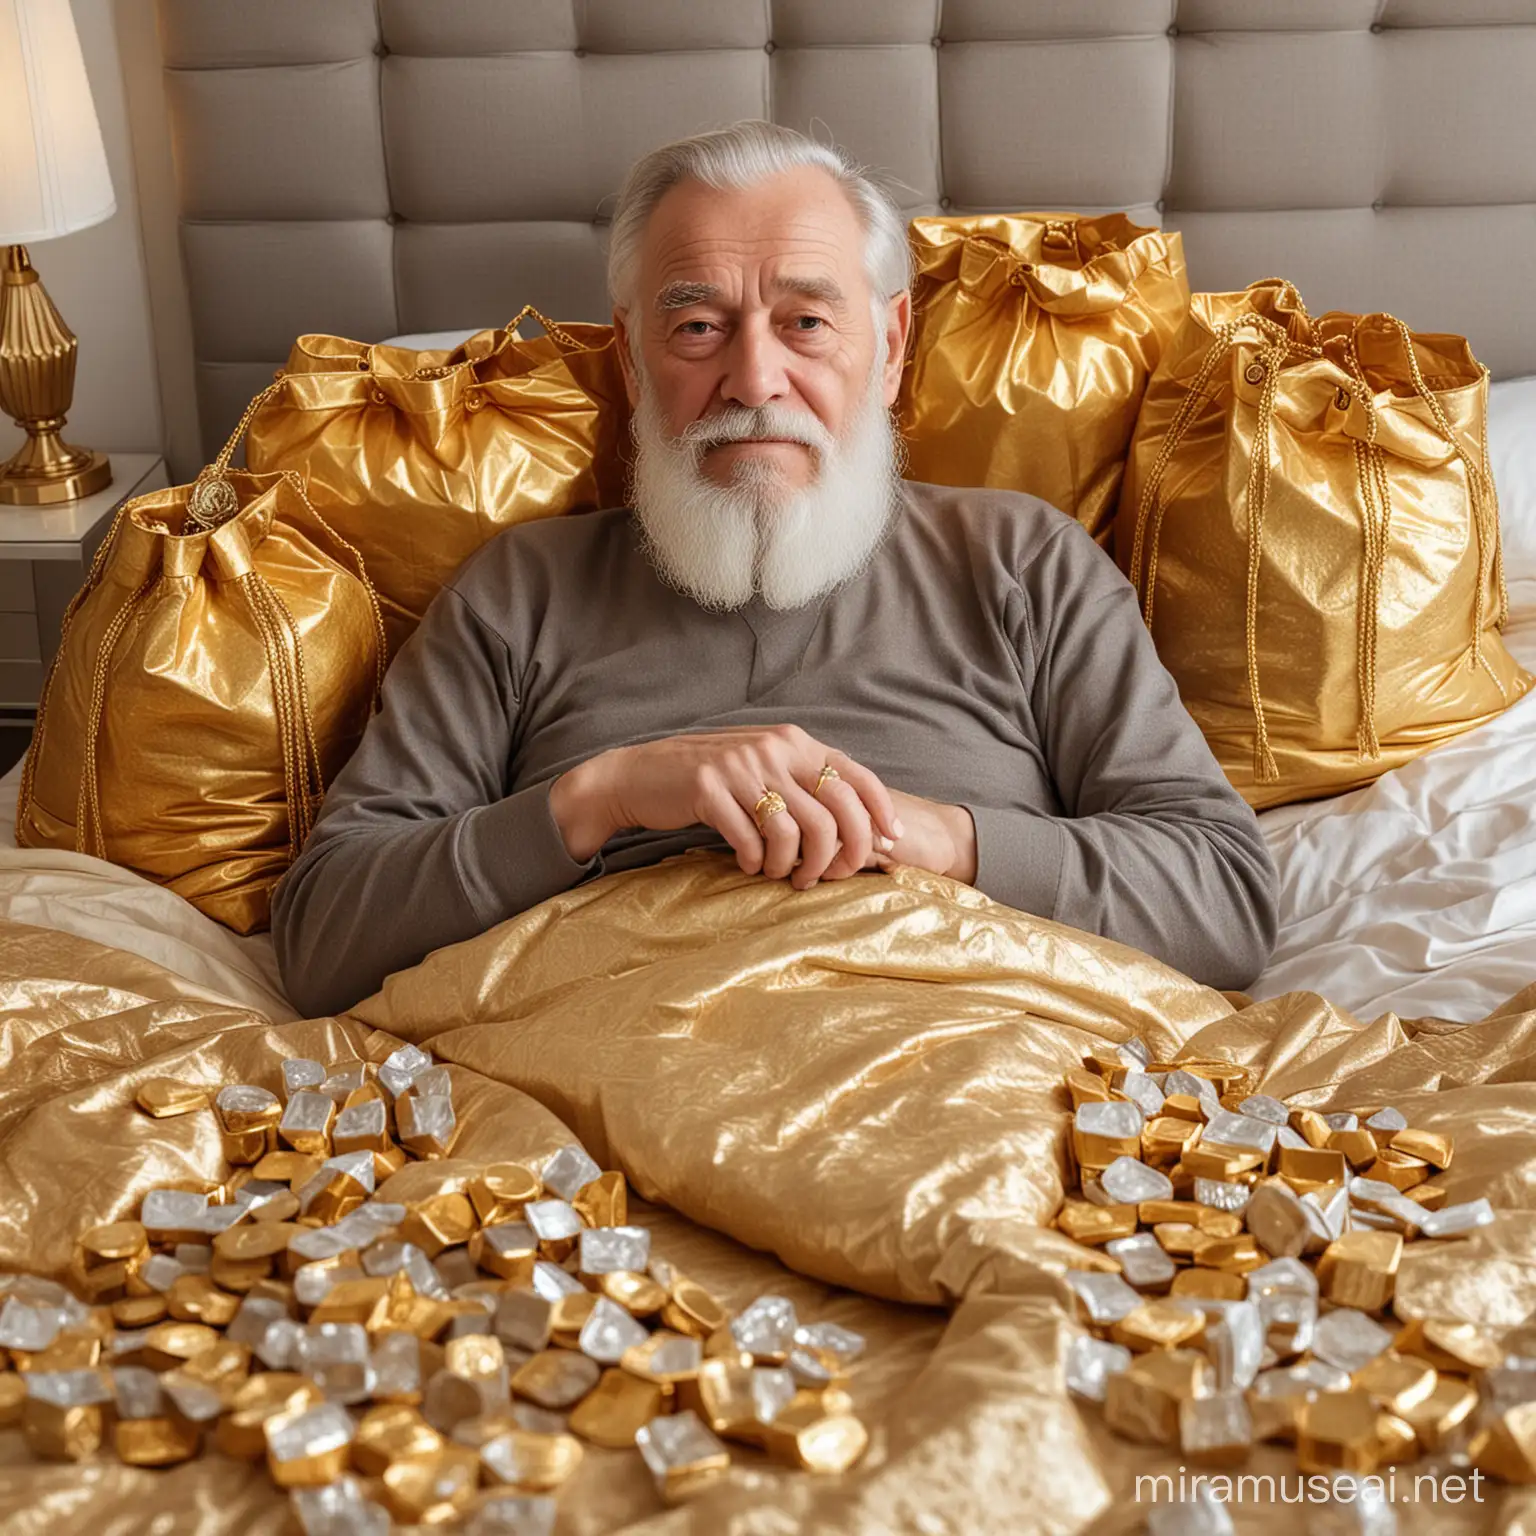 Wealthy Crypto King Resting Surrounded by Gold in Opulent CrystalAdorned Apartment